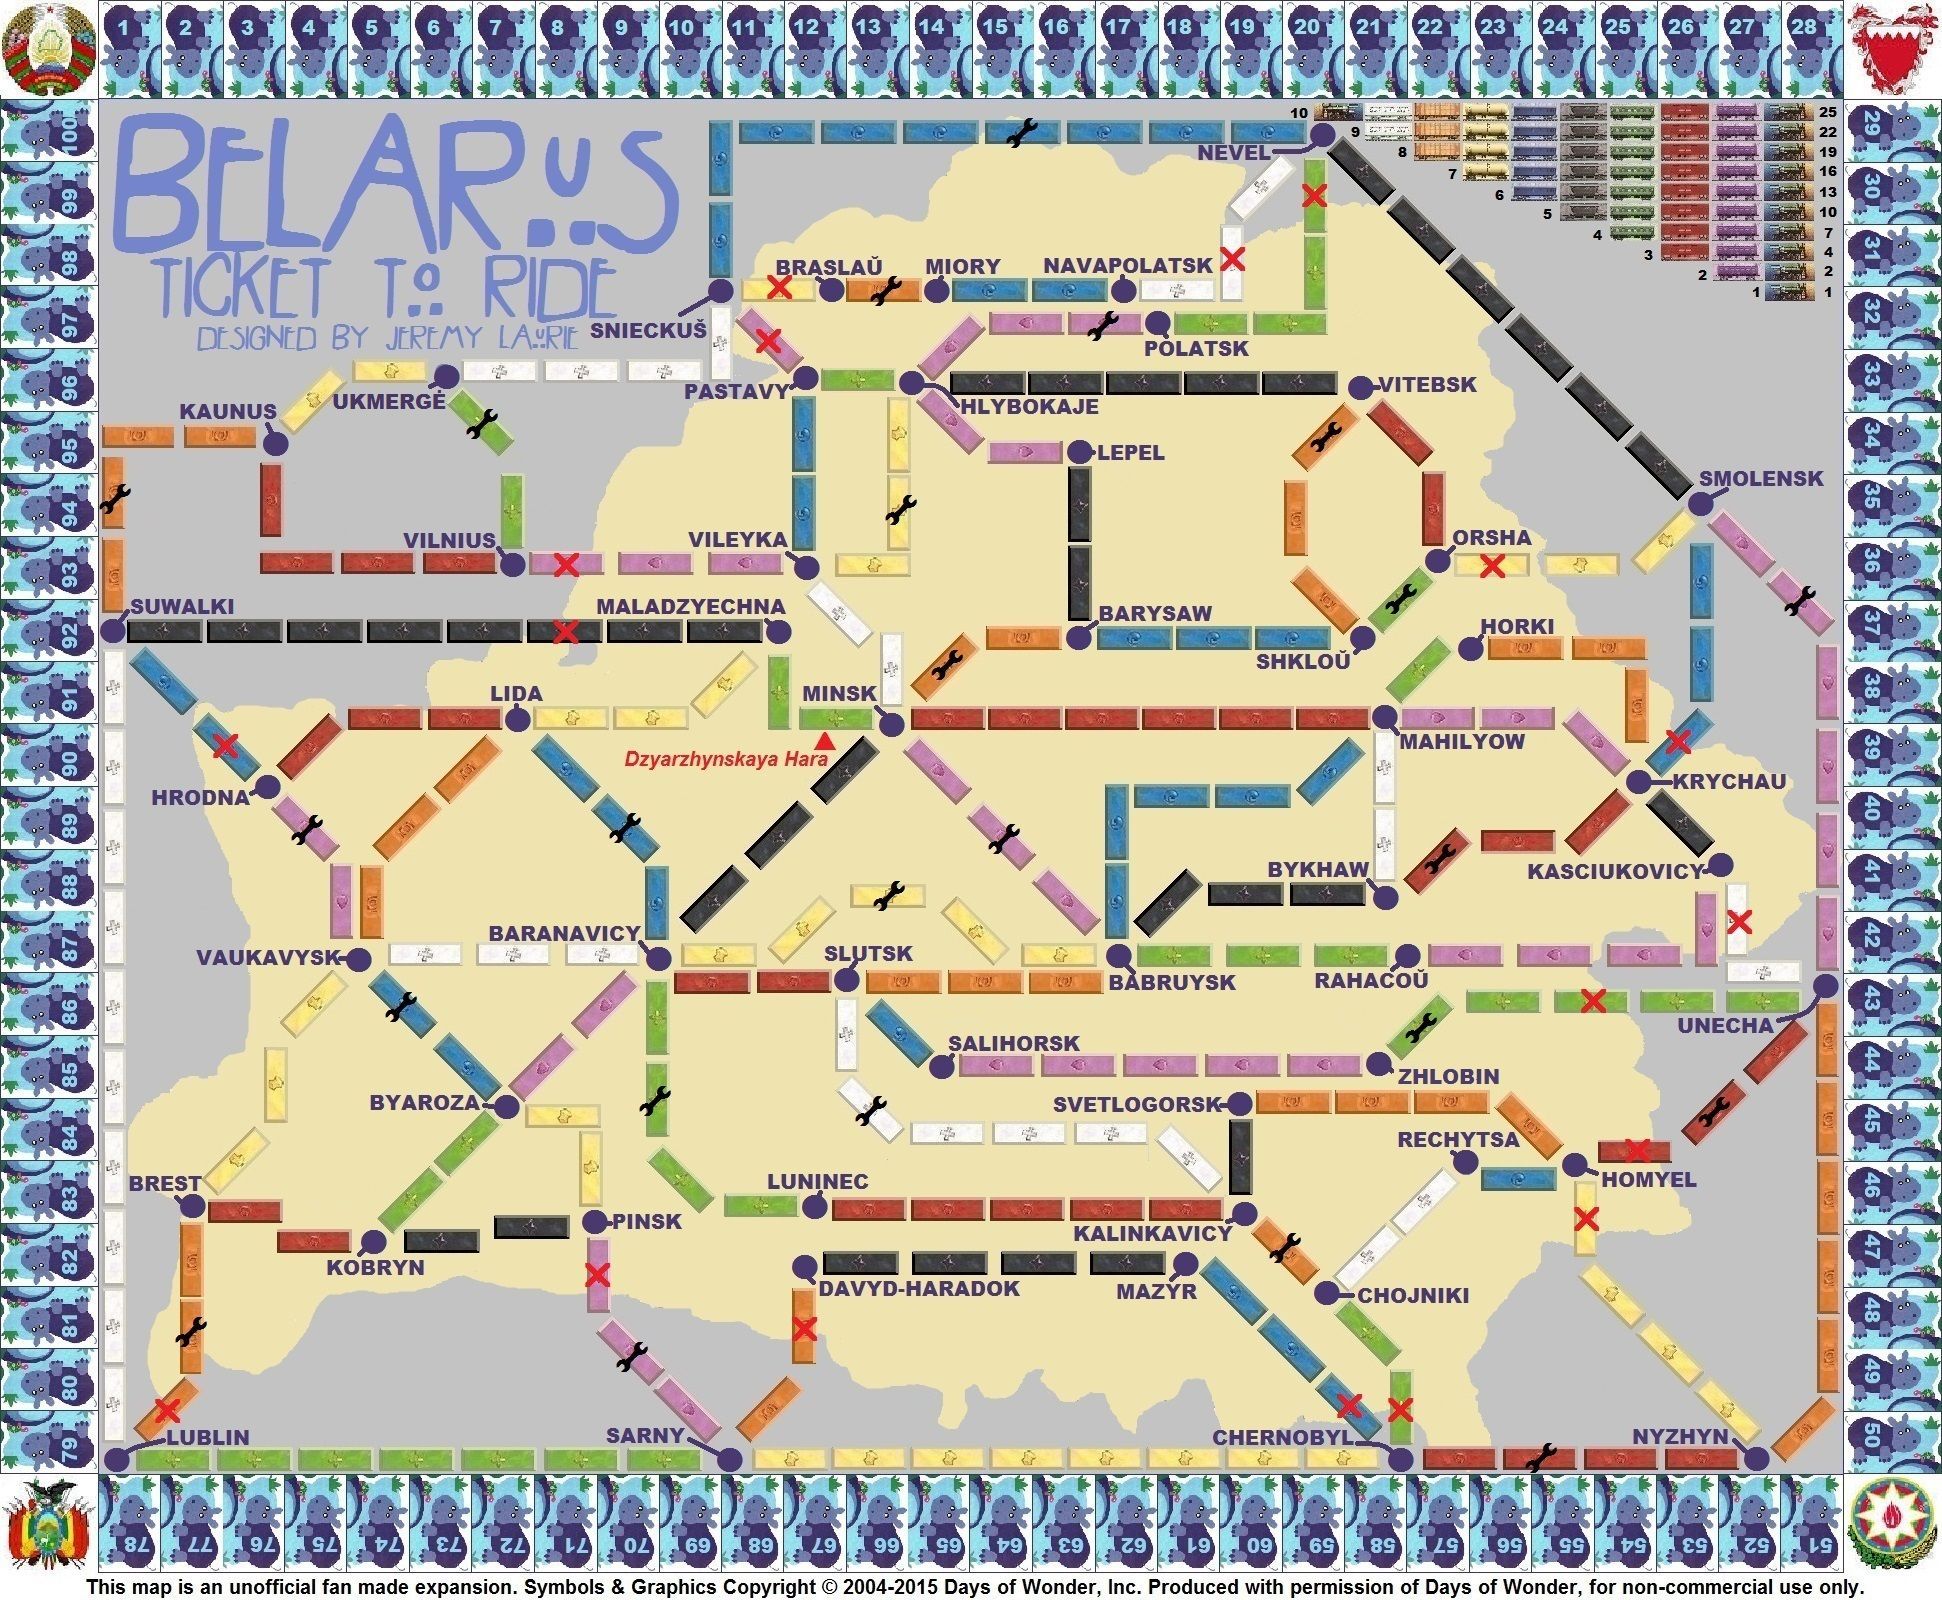 Belarus (fan expansion for Ticket to Ride)